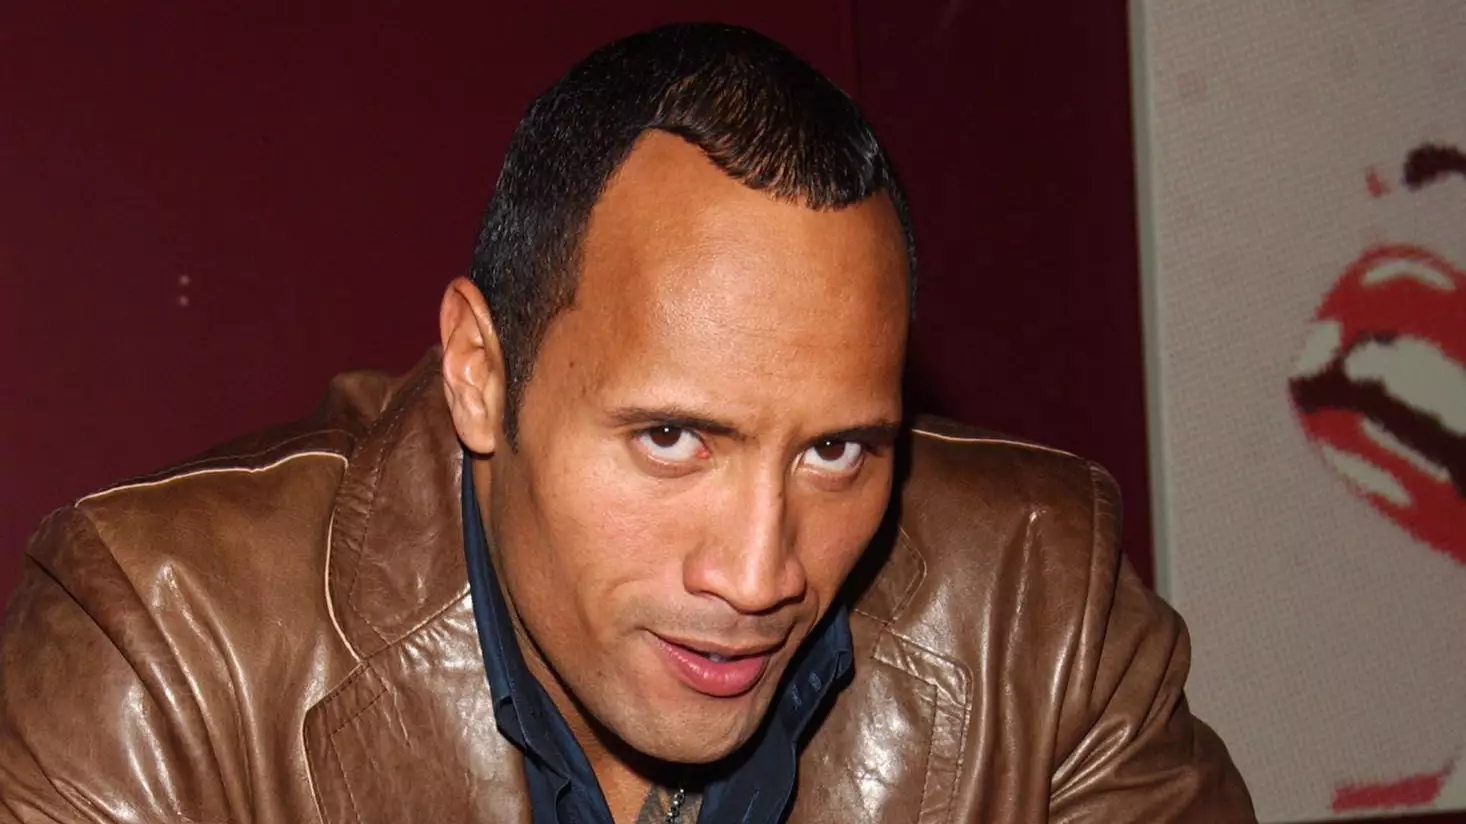 The Rock Recreates Classic '90s Look For Saturday Night Live